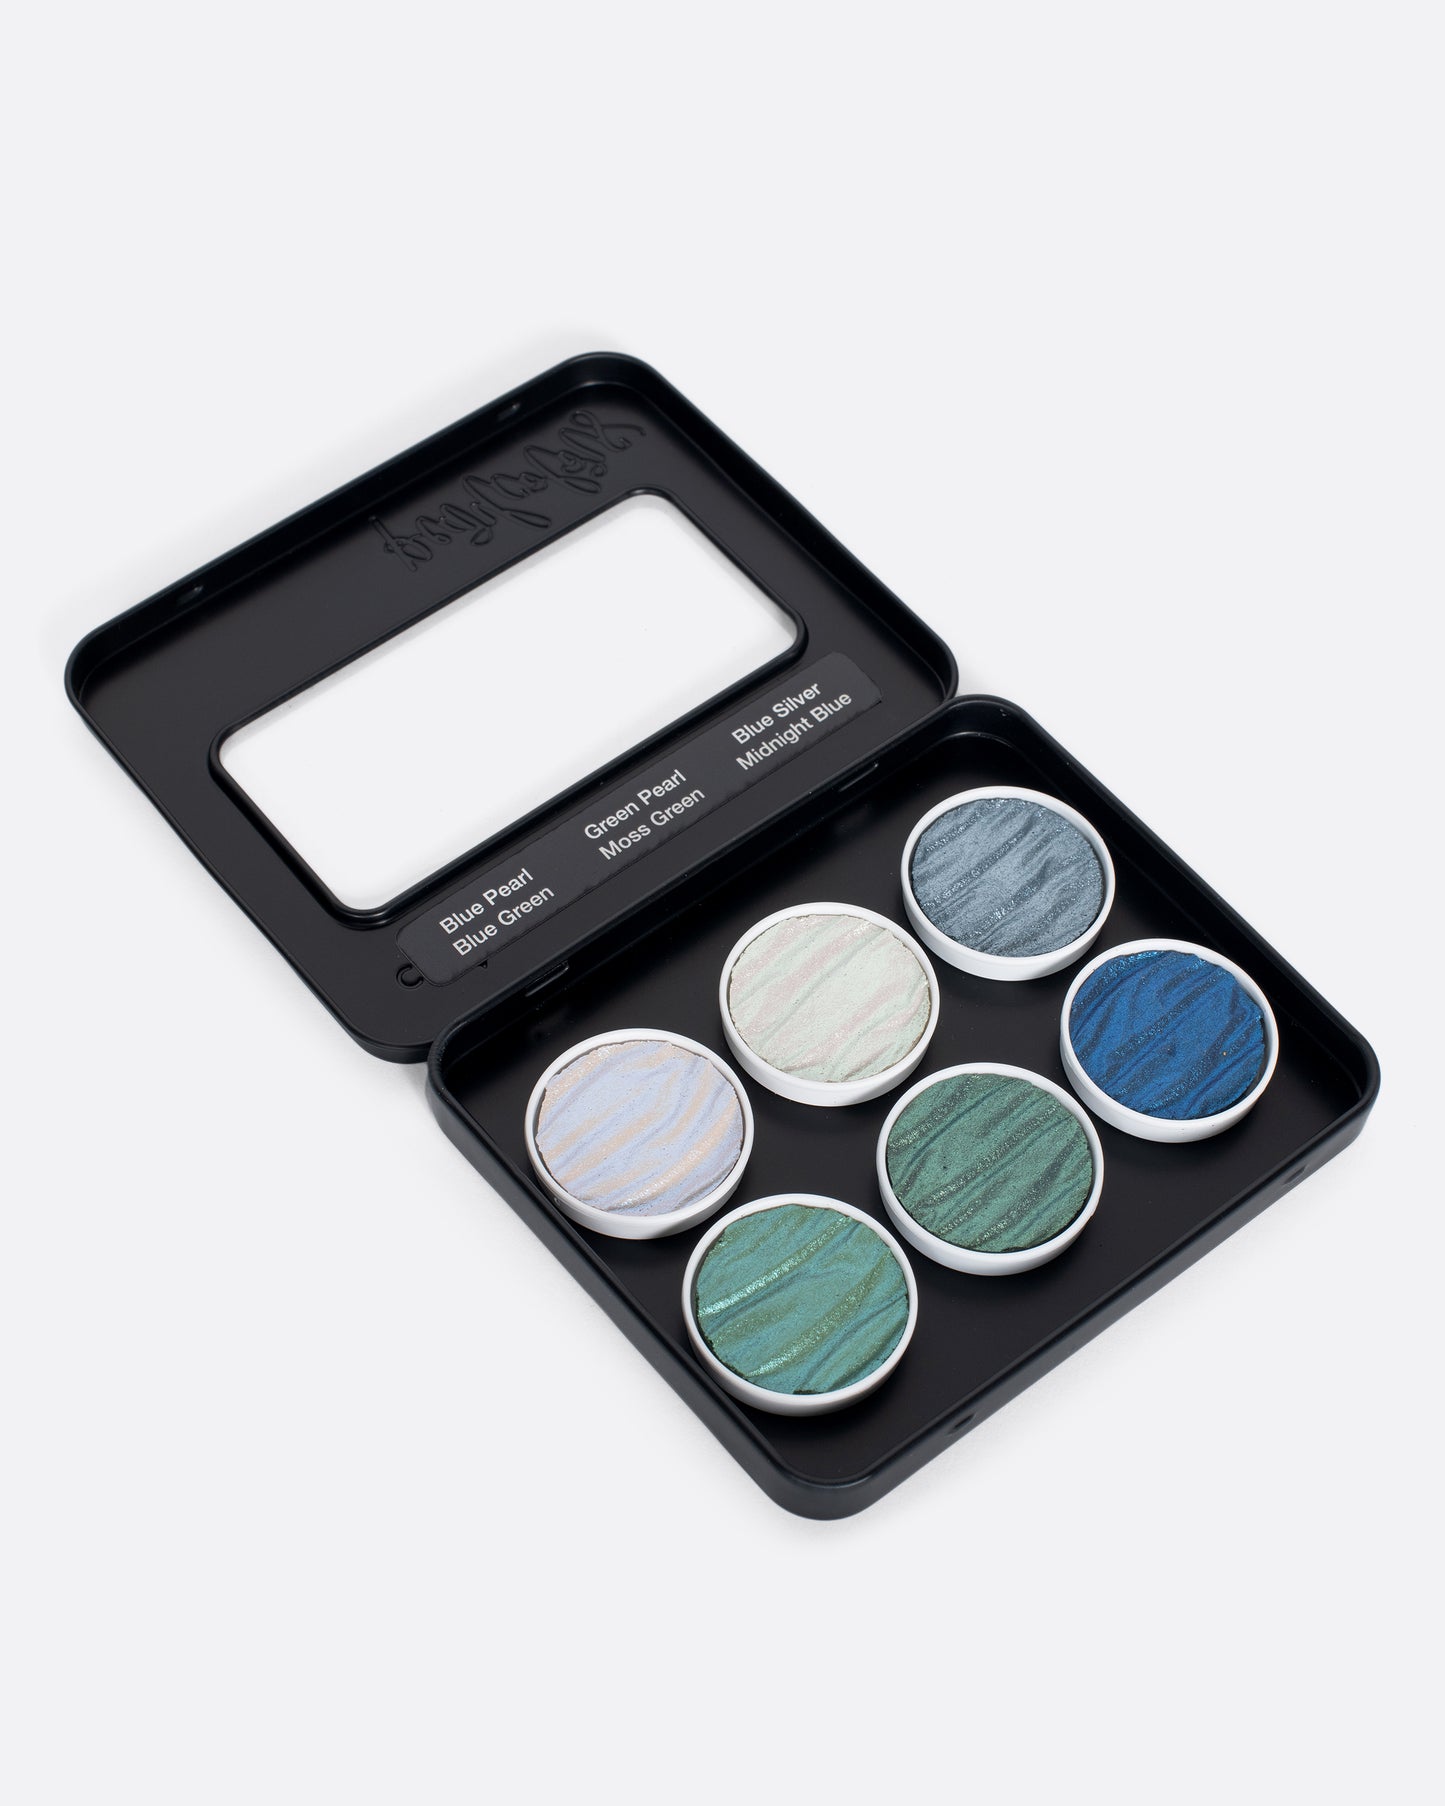 Made in Germany, this metallic watercolor set features colors themed like the ocean, use in addition to more opaque colors to create shimmering paintings.